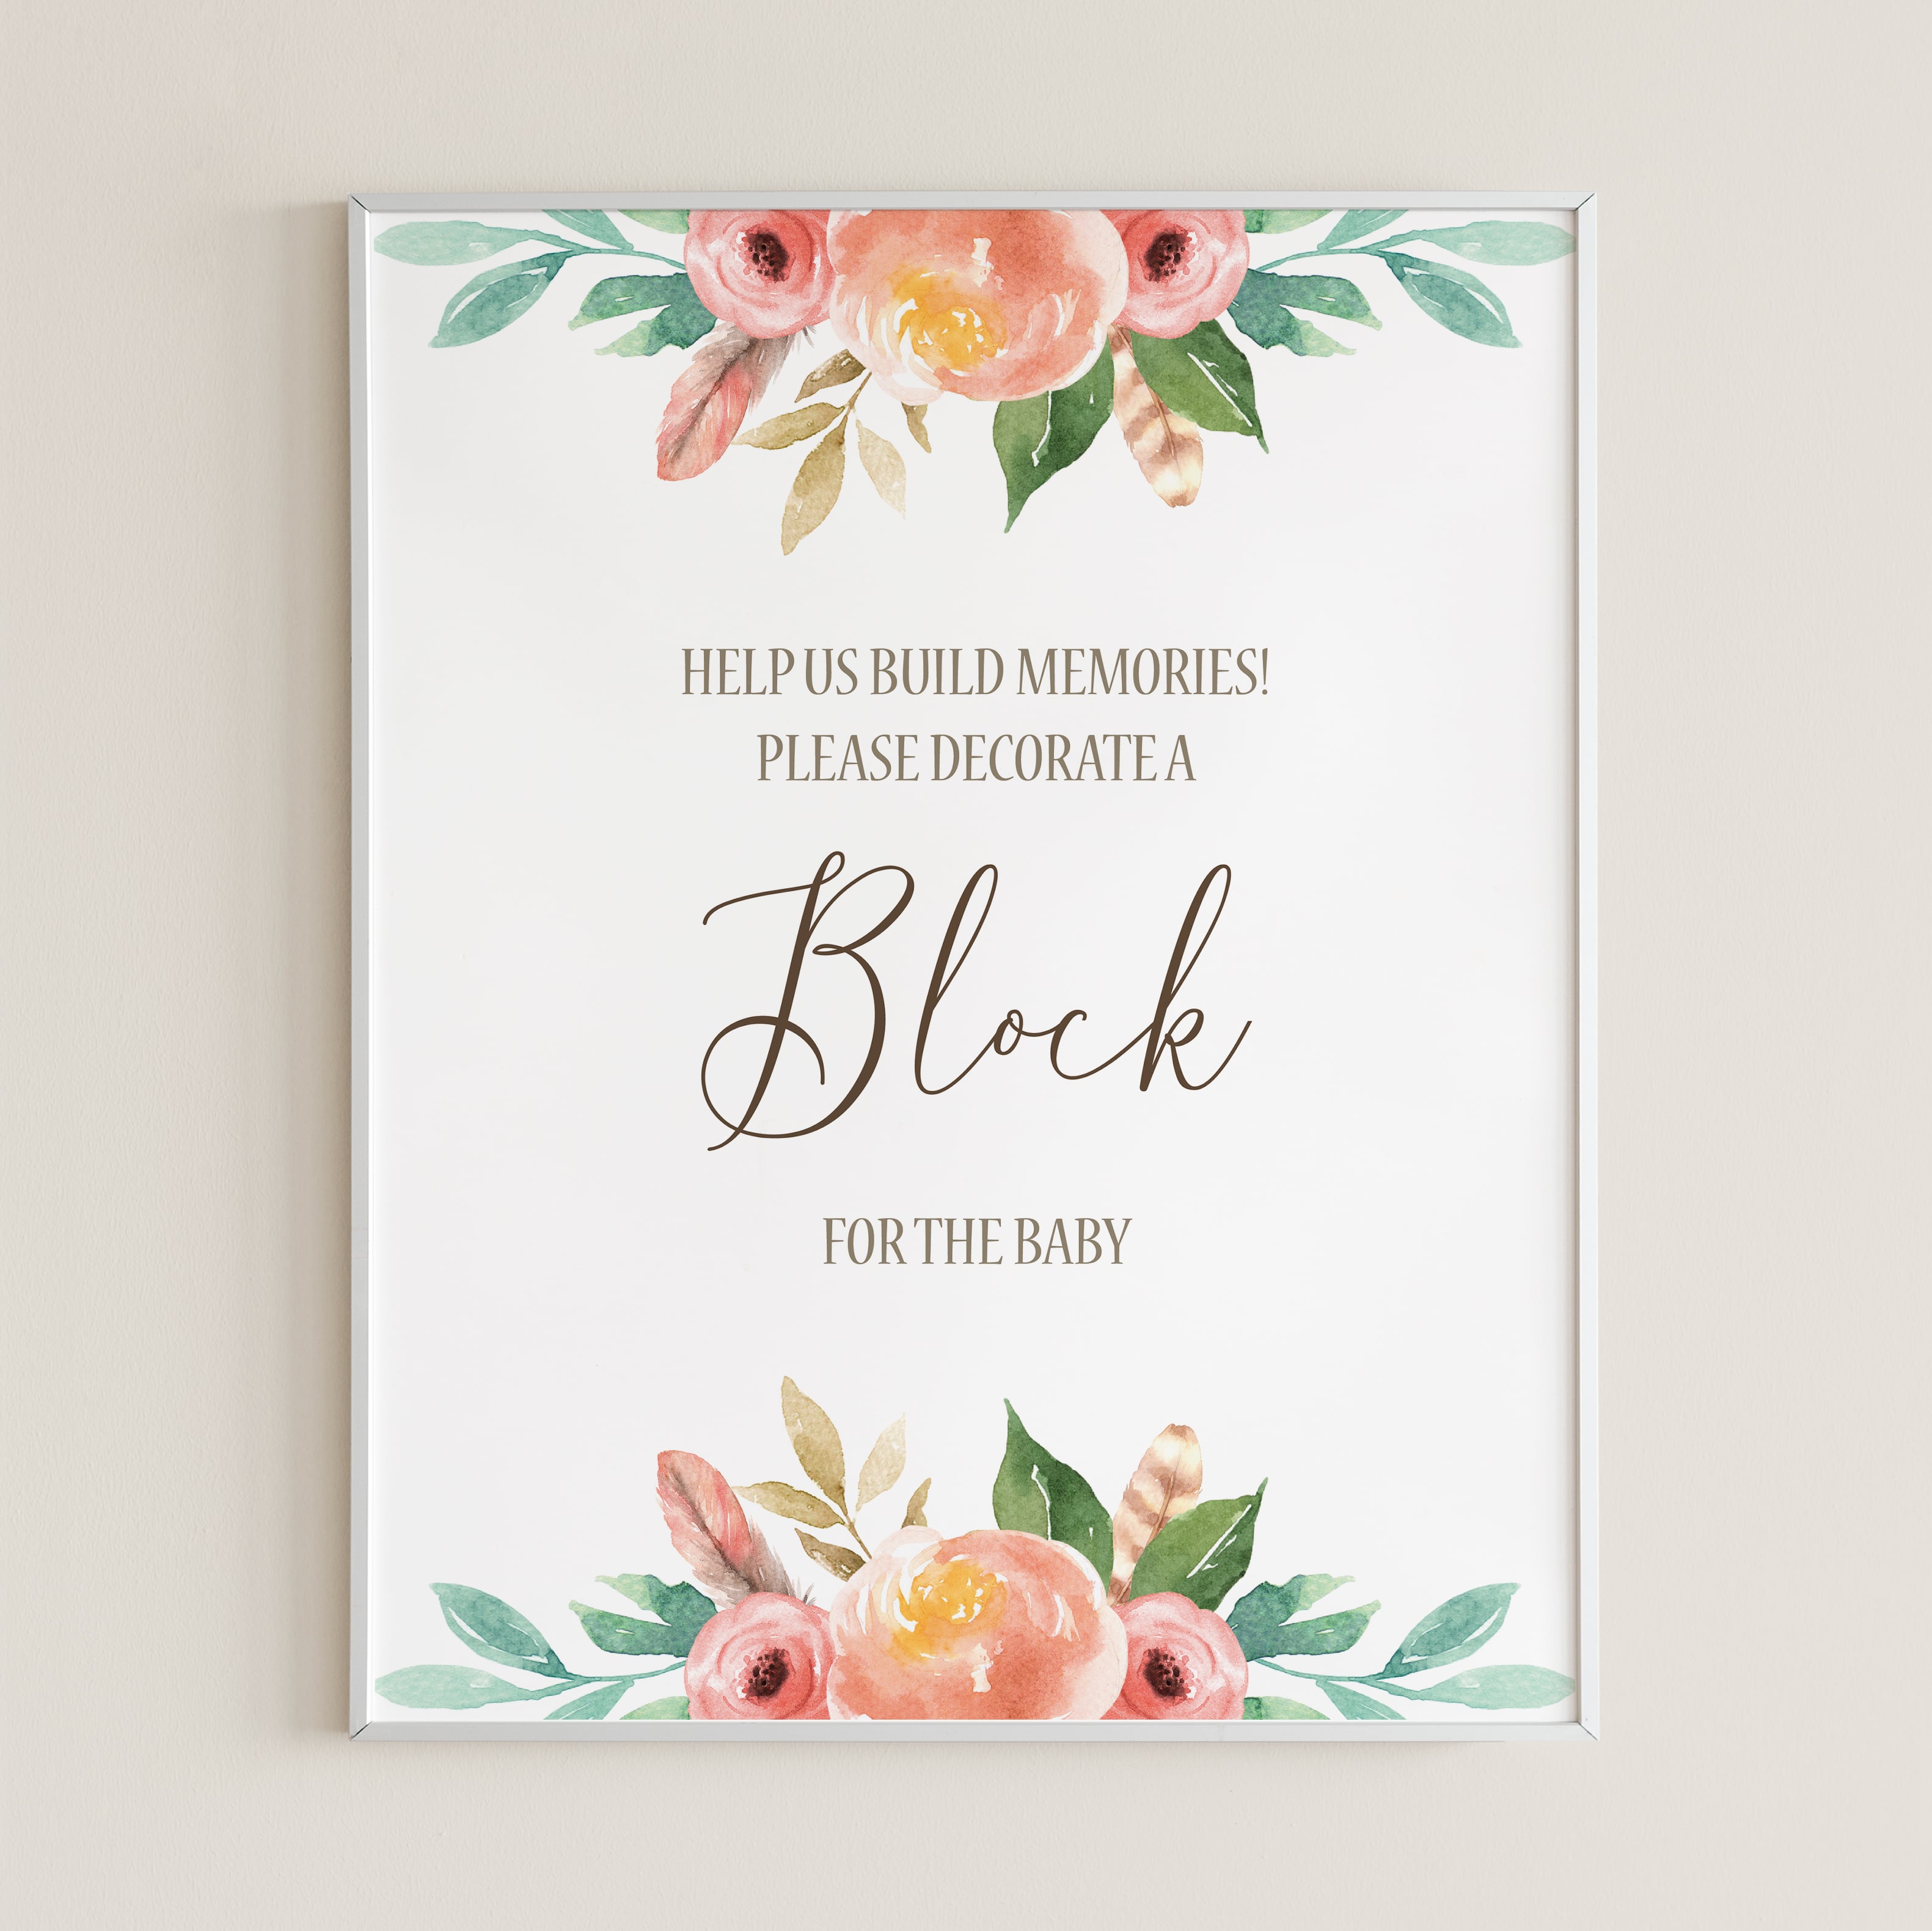 DIY baby shower ideas floral by LittleSizzle